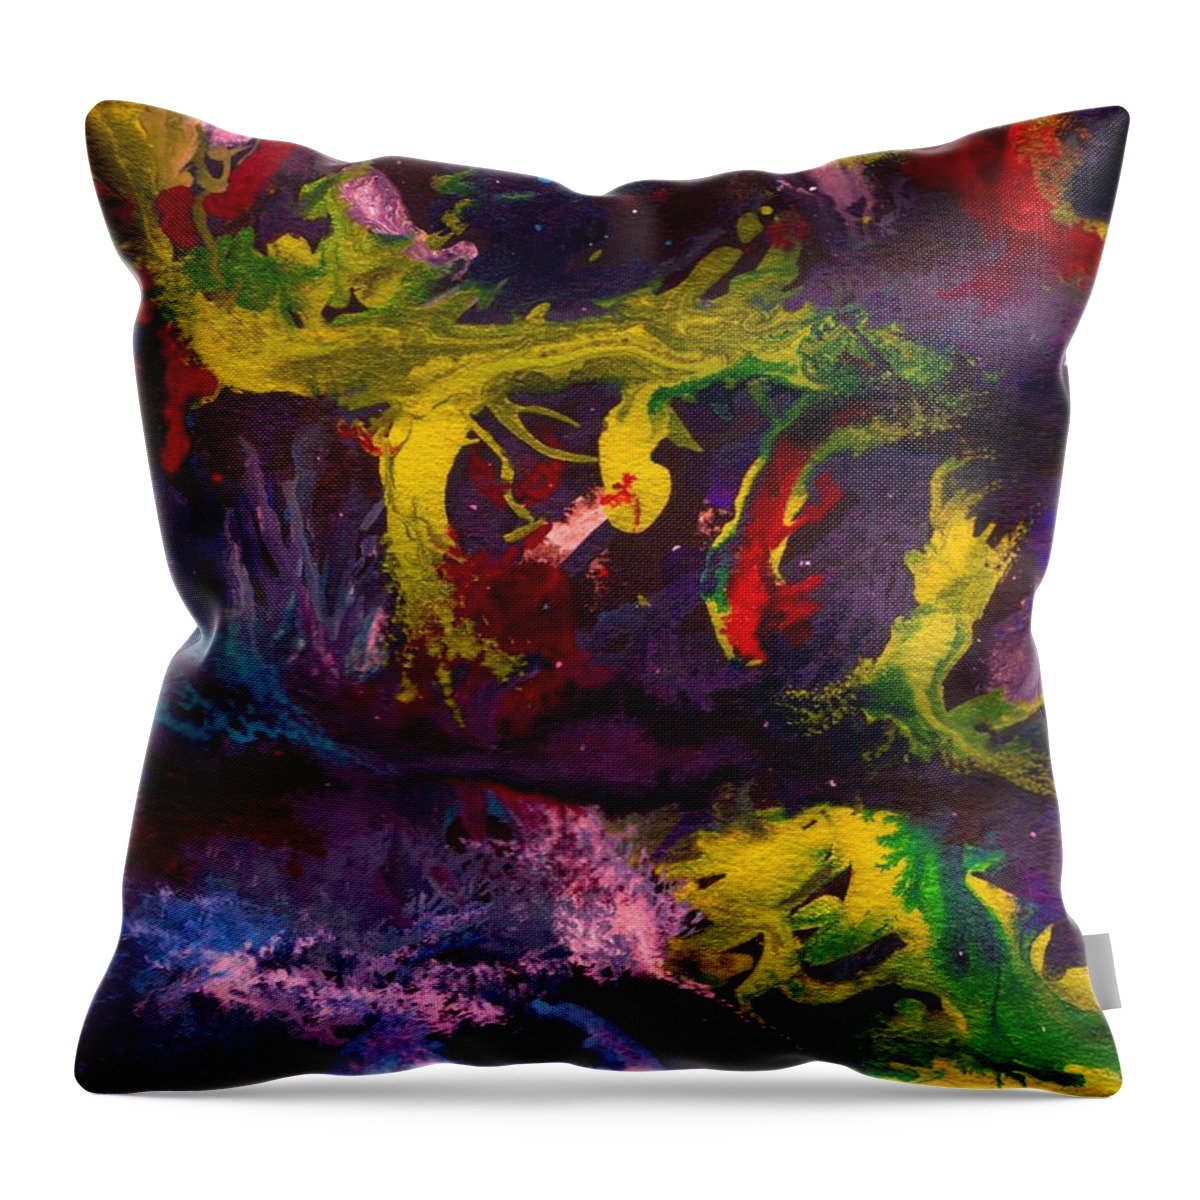 Space Painting Throw Pillow featuring the drawing Controled Chaos by David Neace